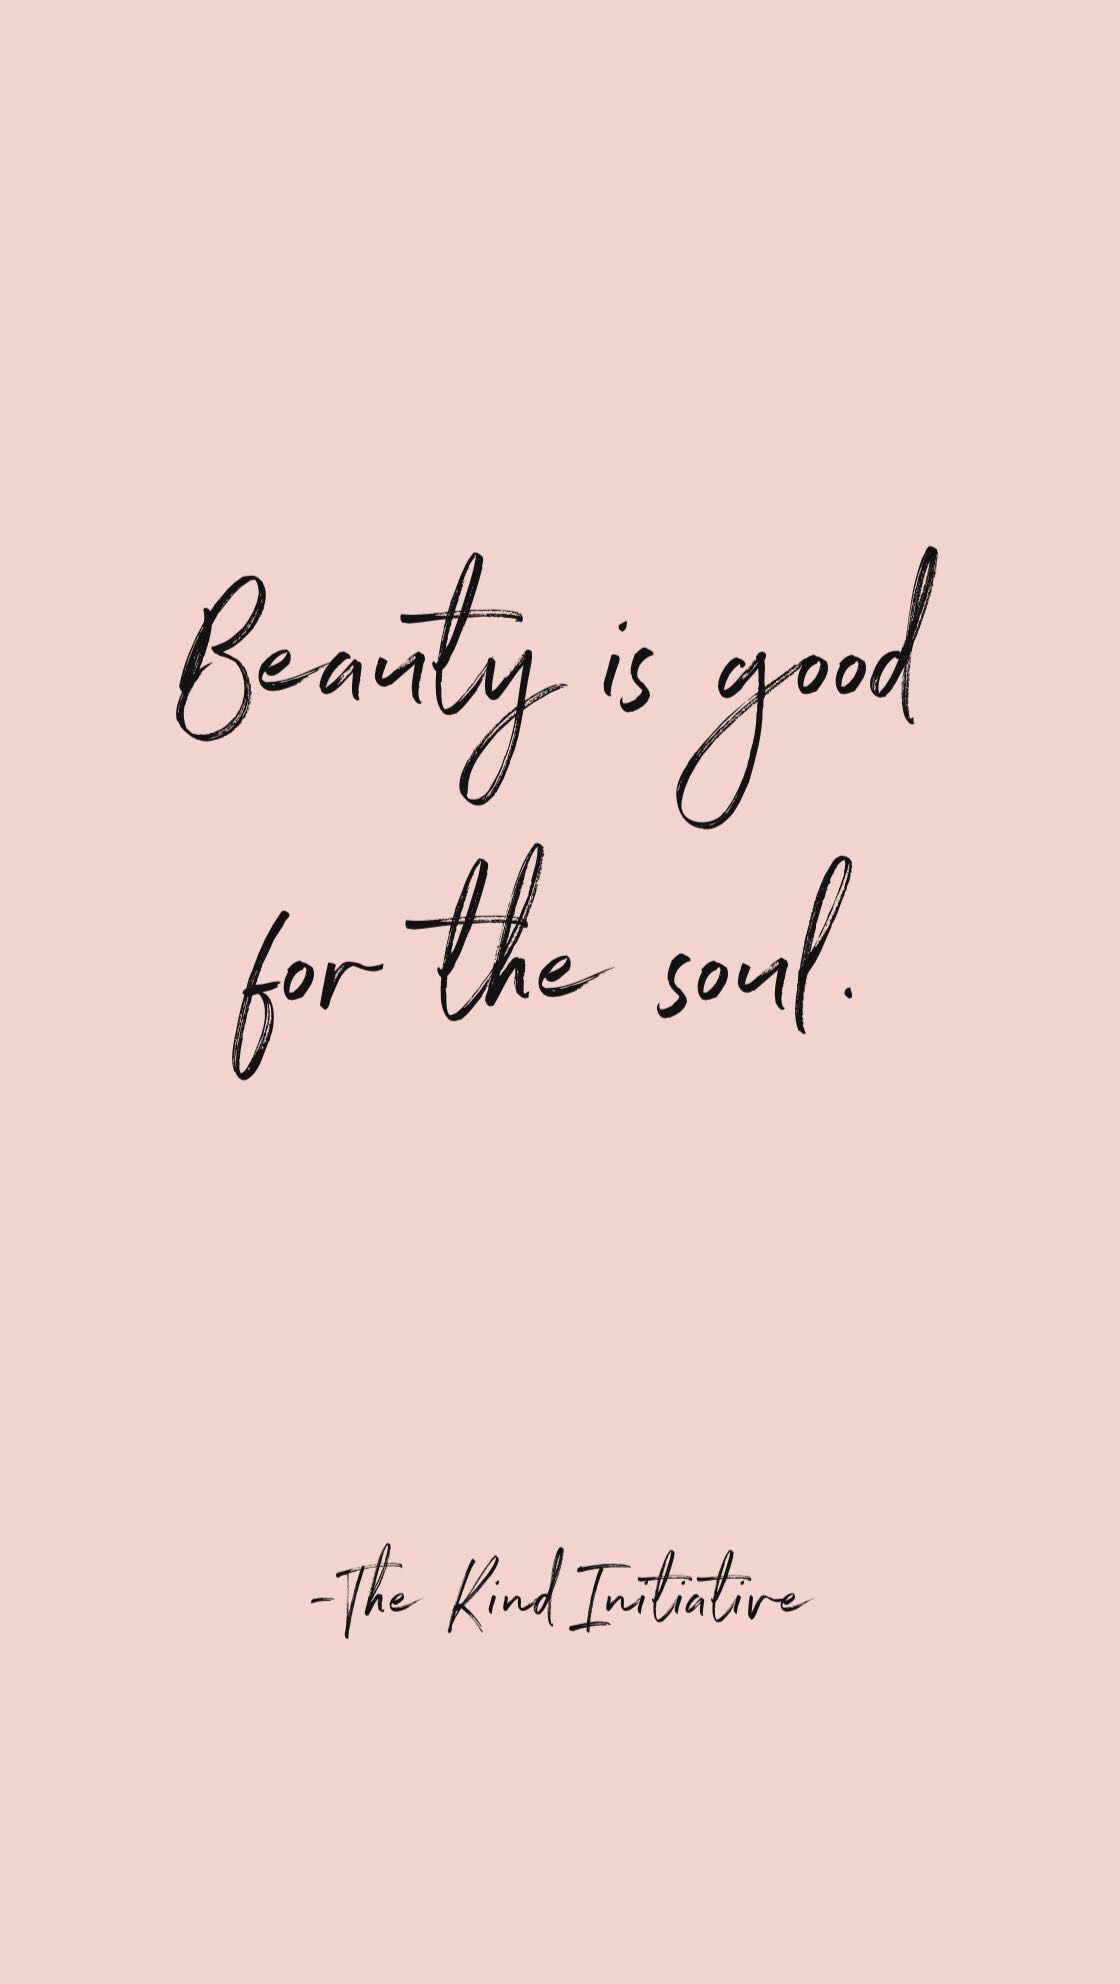 Inspirational Quotes -Inspirational Quotes- Self-Love-Motivation-Truth - Inspirational Quotes -Inspirational Quotes- Self-Love-Motivation-Truth -   16 natural beauty Quotes ideas